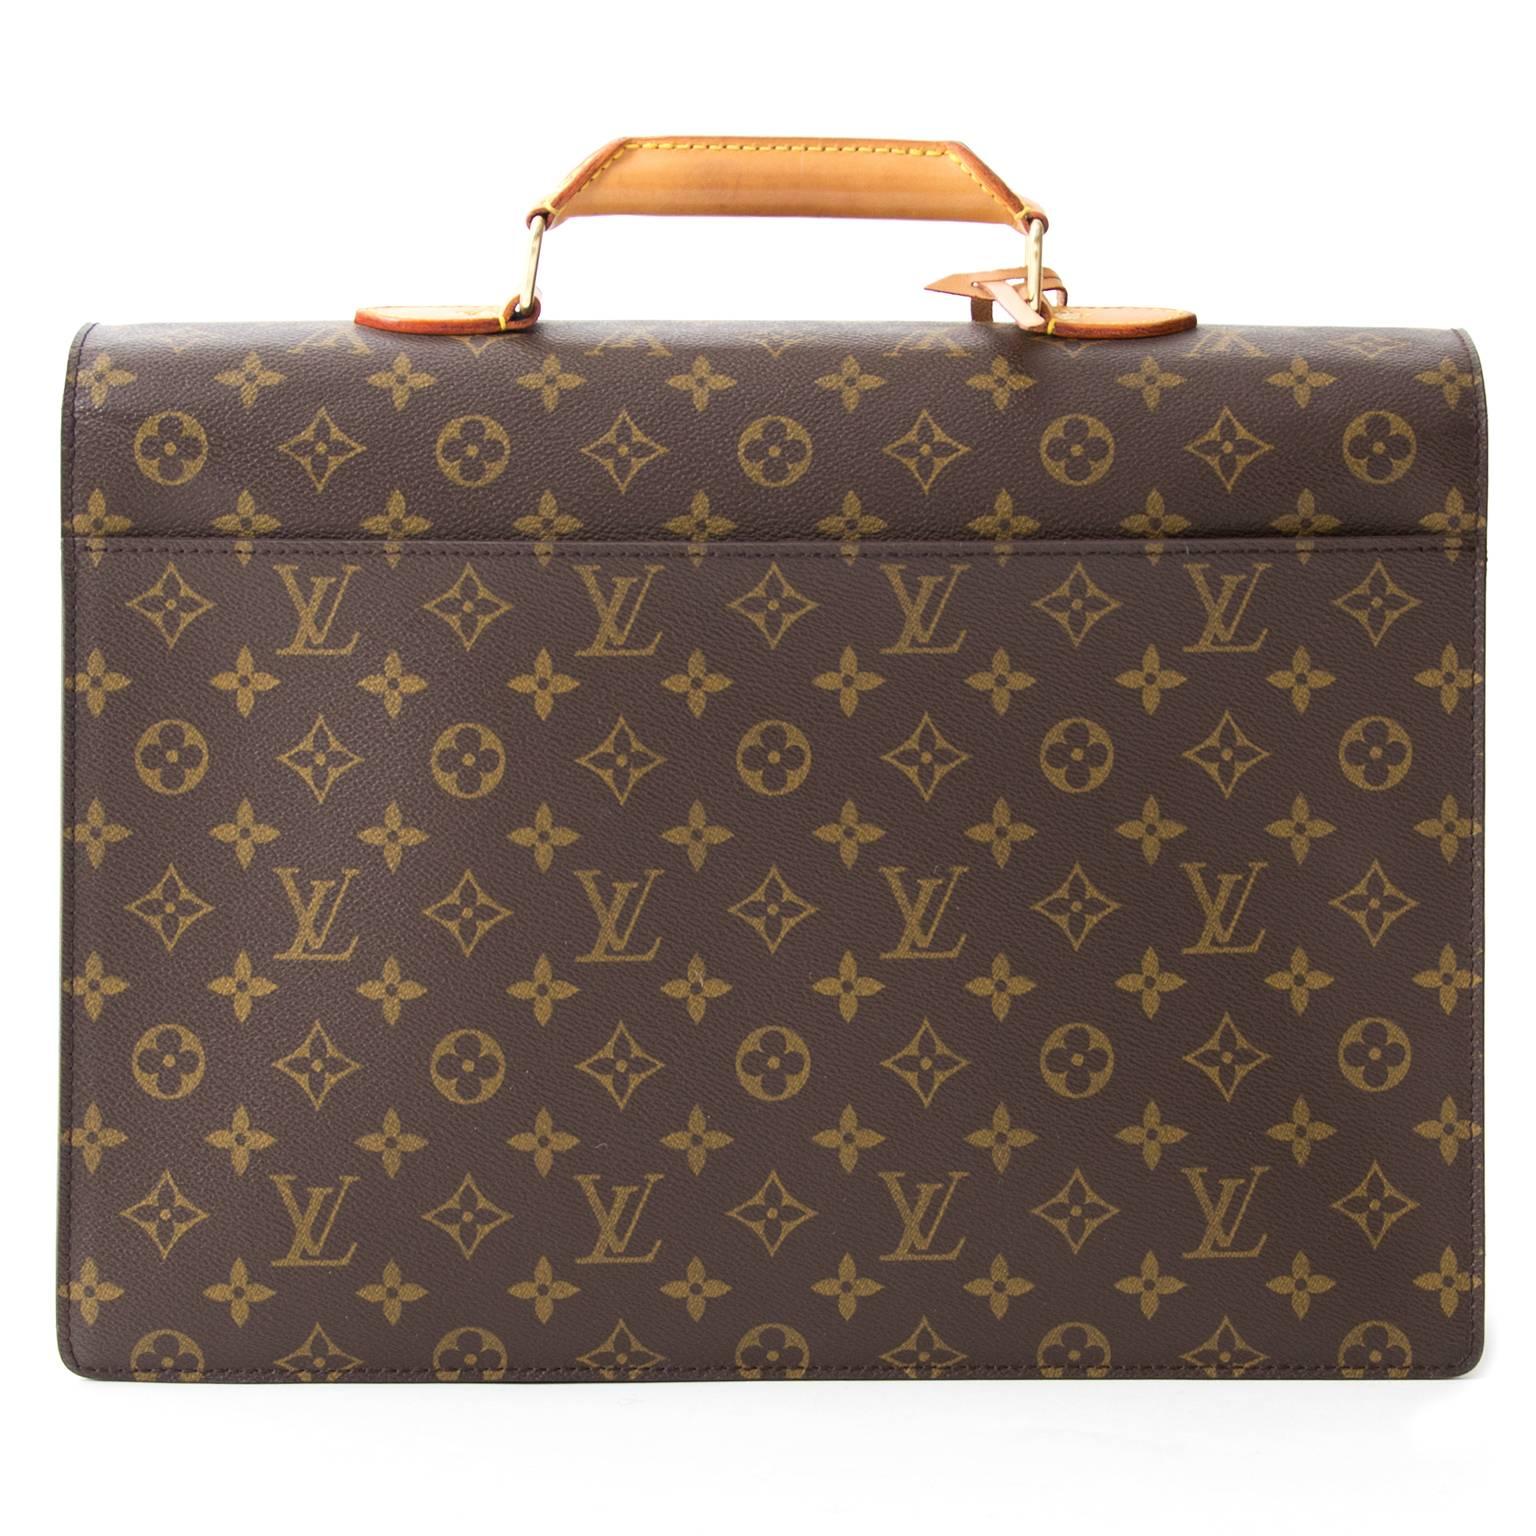 Stylish monogram briefcase by Louis Vuitton with a leather handle and gold-tone details. Extra compartment at the back. Functional interior with two large compartments keeps papers and personal items in order. Comes with a little key to lock the